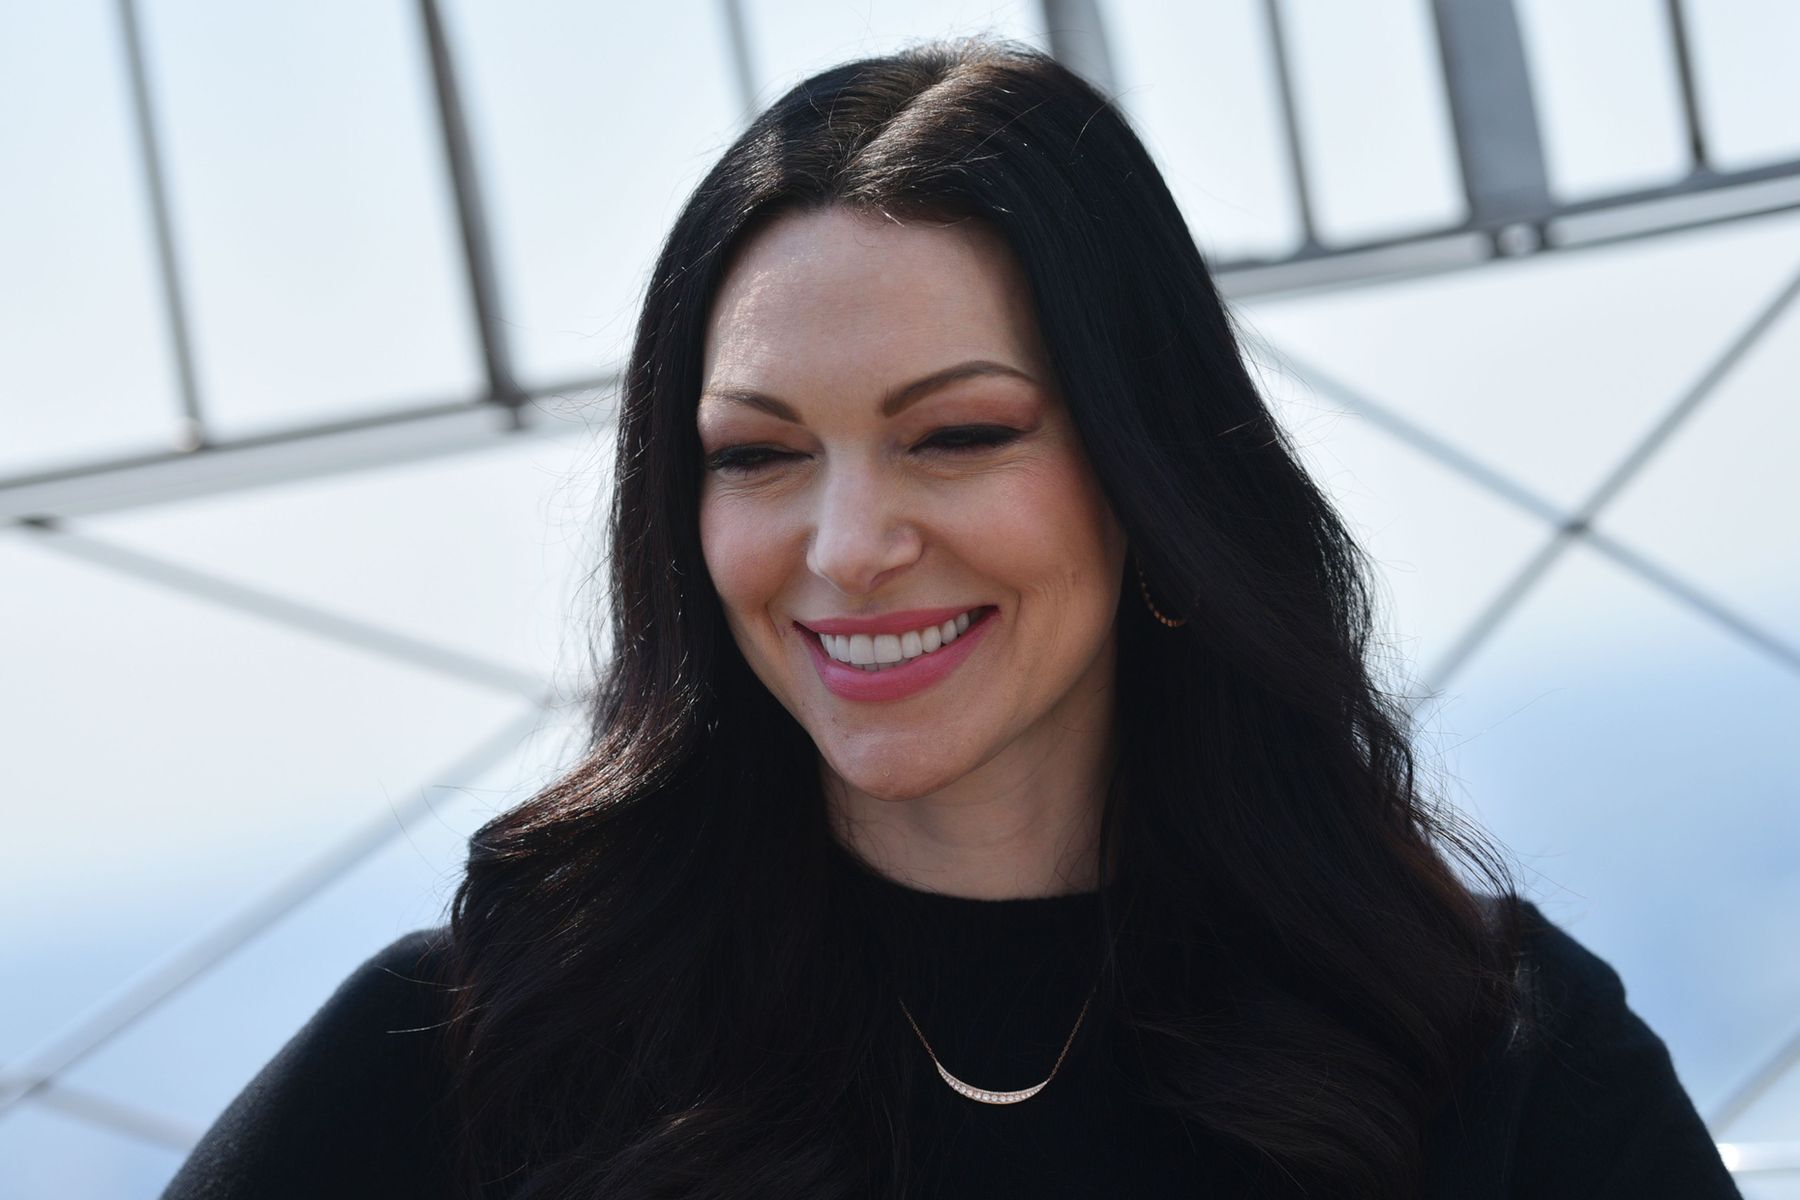 <p>The<em> Orange Is the New Black</em> star reportedly began dating the actor two years after his split from Holmes. <a href="https://www.imdb.com/name/nm0696059/">Prepon</a> denied the rumours, though, telling <a href="https://www.sheknows.com/entertainment/articles/1035405/interview-laura-prepon-shoots-down-tom-cruise-rumors/"><em>SheKnows</em></a>: “It’s just so funny that, when people don’t know, they just make stuff up, [like], apparently I’m dating Tom Cruise right now. And apparently he doesn’t want me doing the show because I portray a lesbian and I’m a Scientologist. This is false; where are they even getting this stuff? It’s unbelievable to me.”</p>